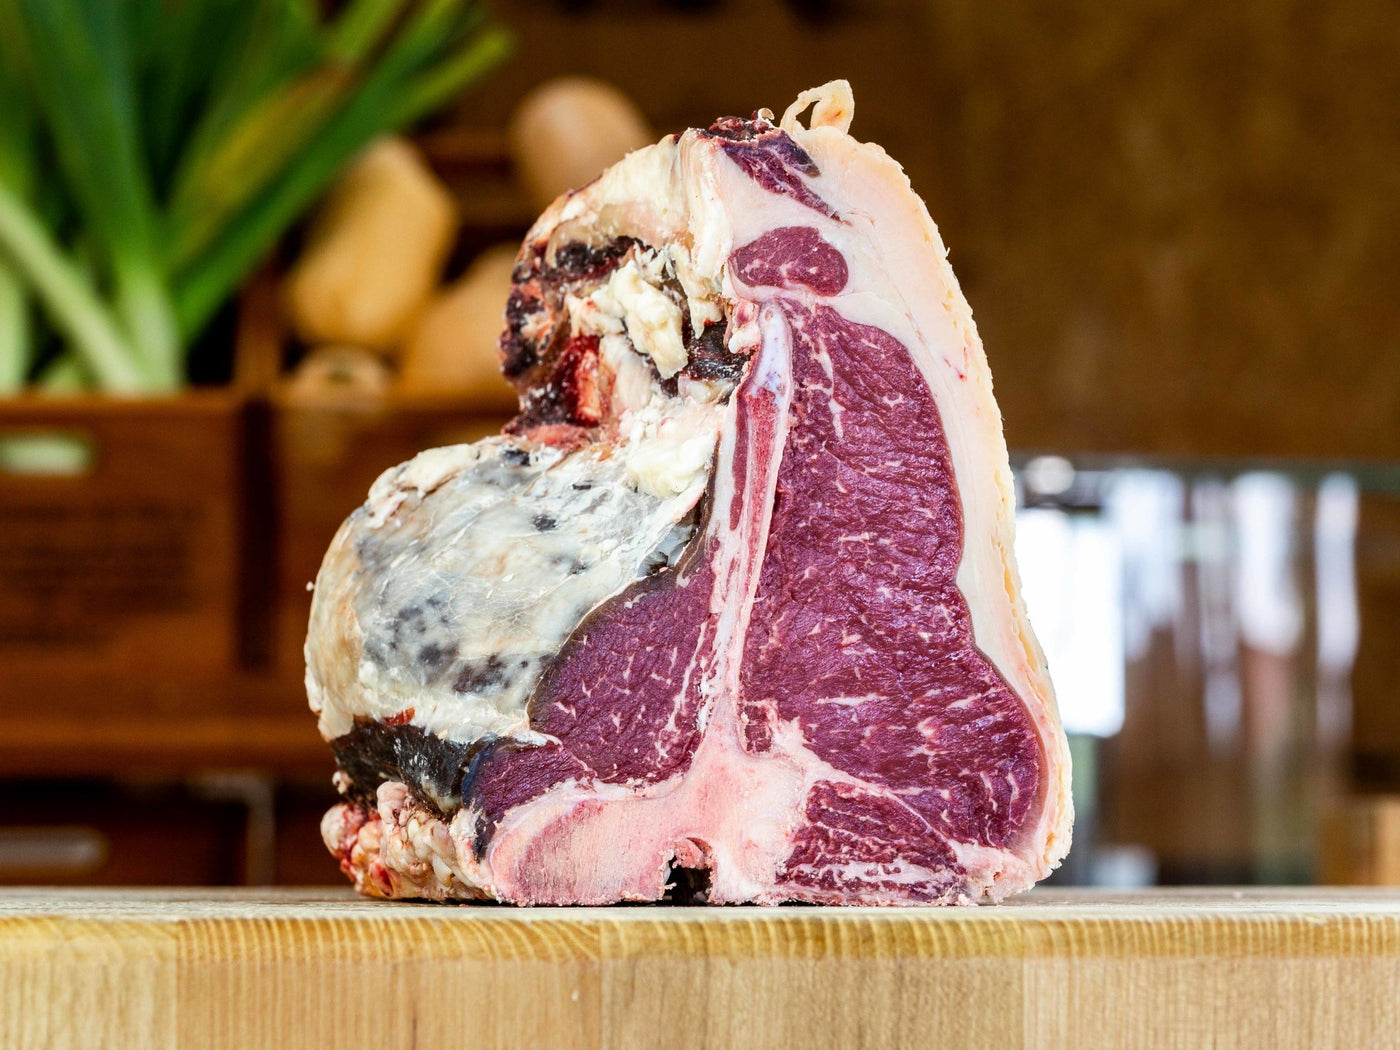 Grass Fed, Dry-Aged T-Bone - Beef - Thomas Joseph Butchery - Ethical Dry-Aged Meat The Best Steak UK Thomas Joseph Butchery